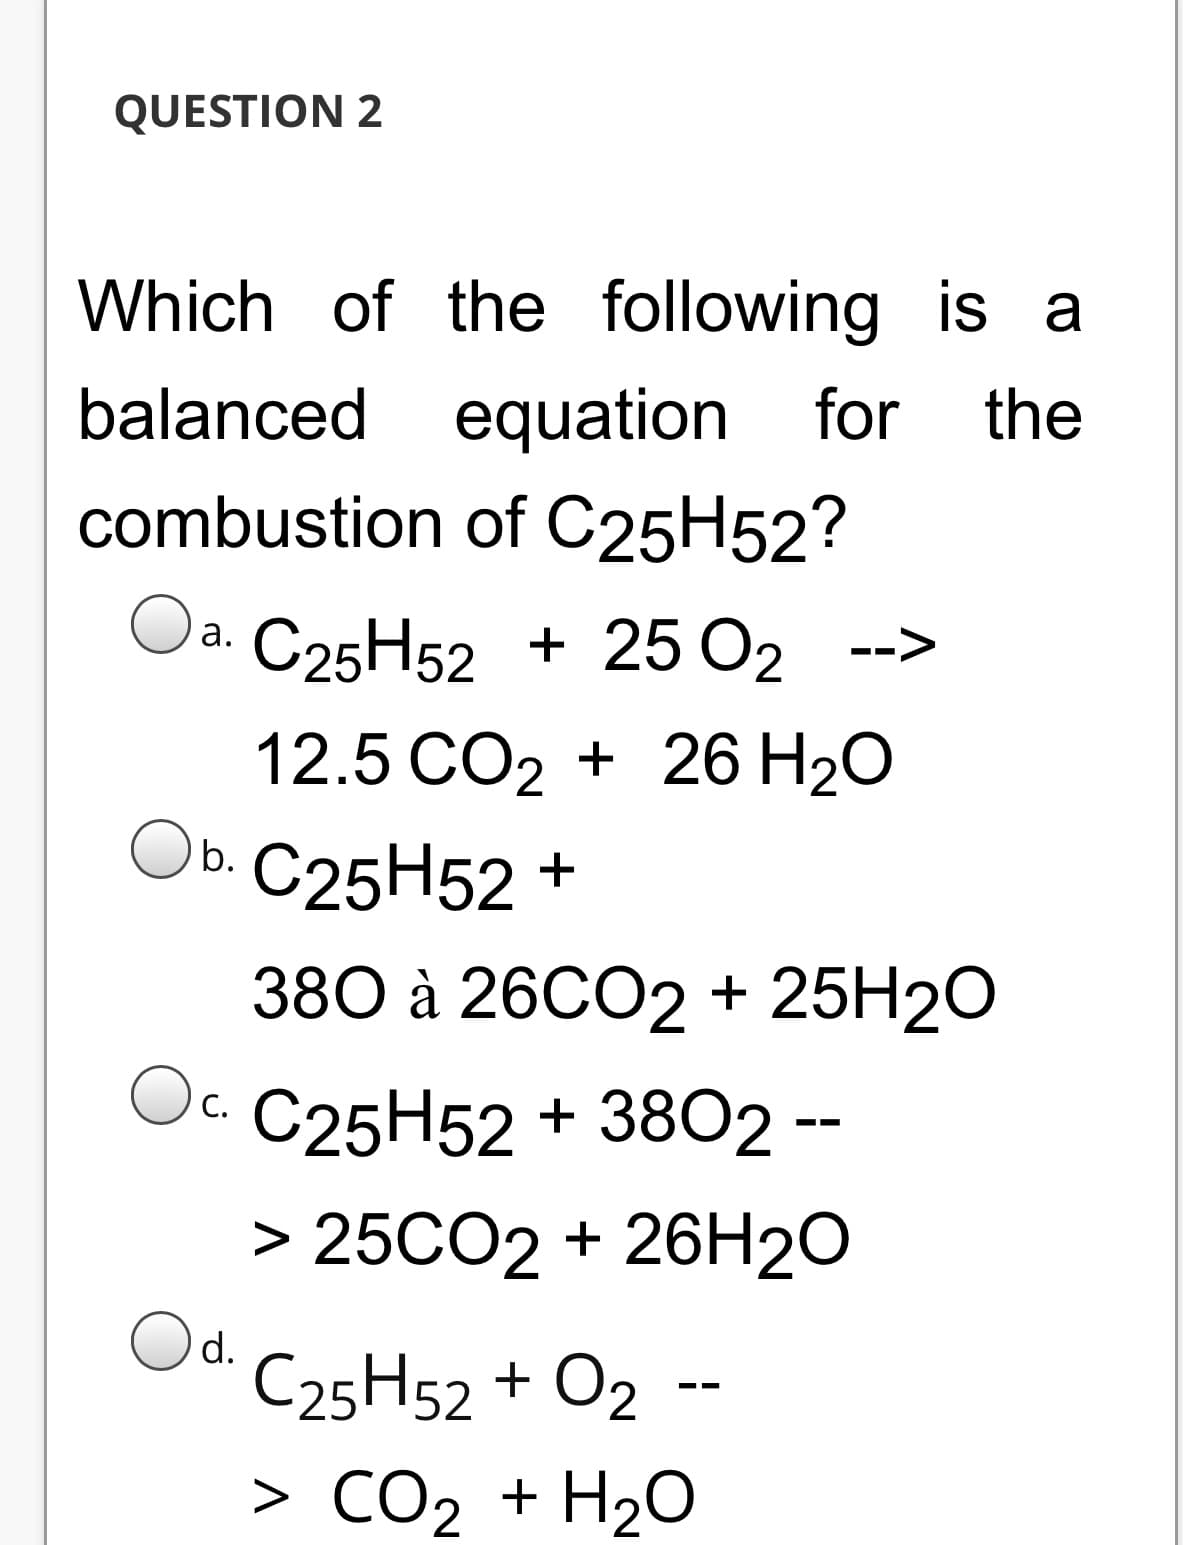 QUESTION 2
Which of the following is a
balanced equation for
combustion of C25H52?
the
C25H52 + 25 O2 -->
а.
12.5 CO2 + 26 H20
Оь. С25 Н52 +
Ob.
380 а 26C02 + 25H20
O. C25H52 + 3802 --
Oc.
> 25CO2 + 26H20
d.
C25H52 + O2 --
> CO2 + H2O
